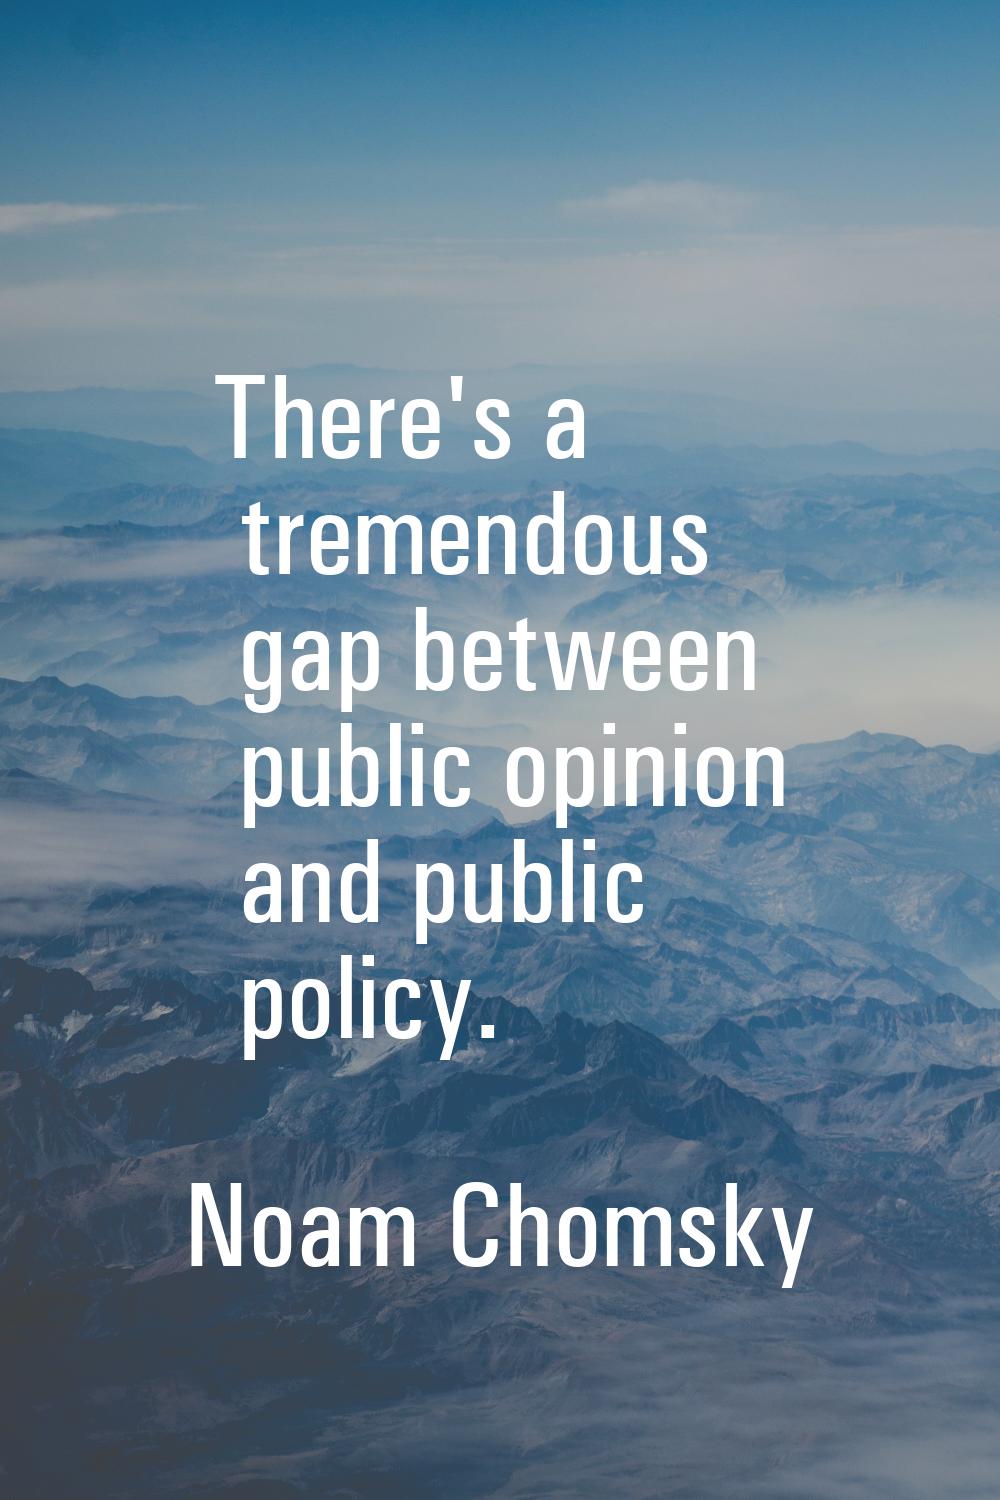 There's a tremendous gap between public opinion and public policy.